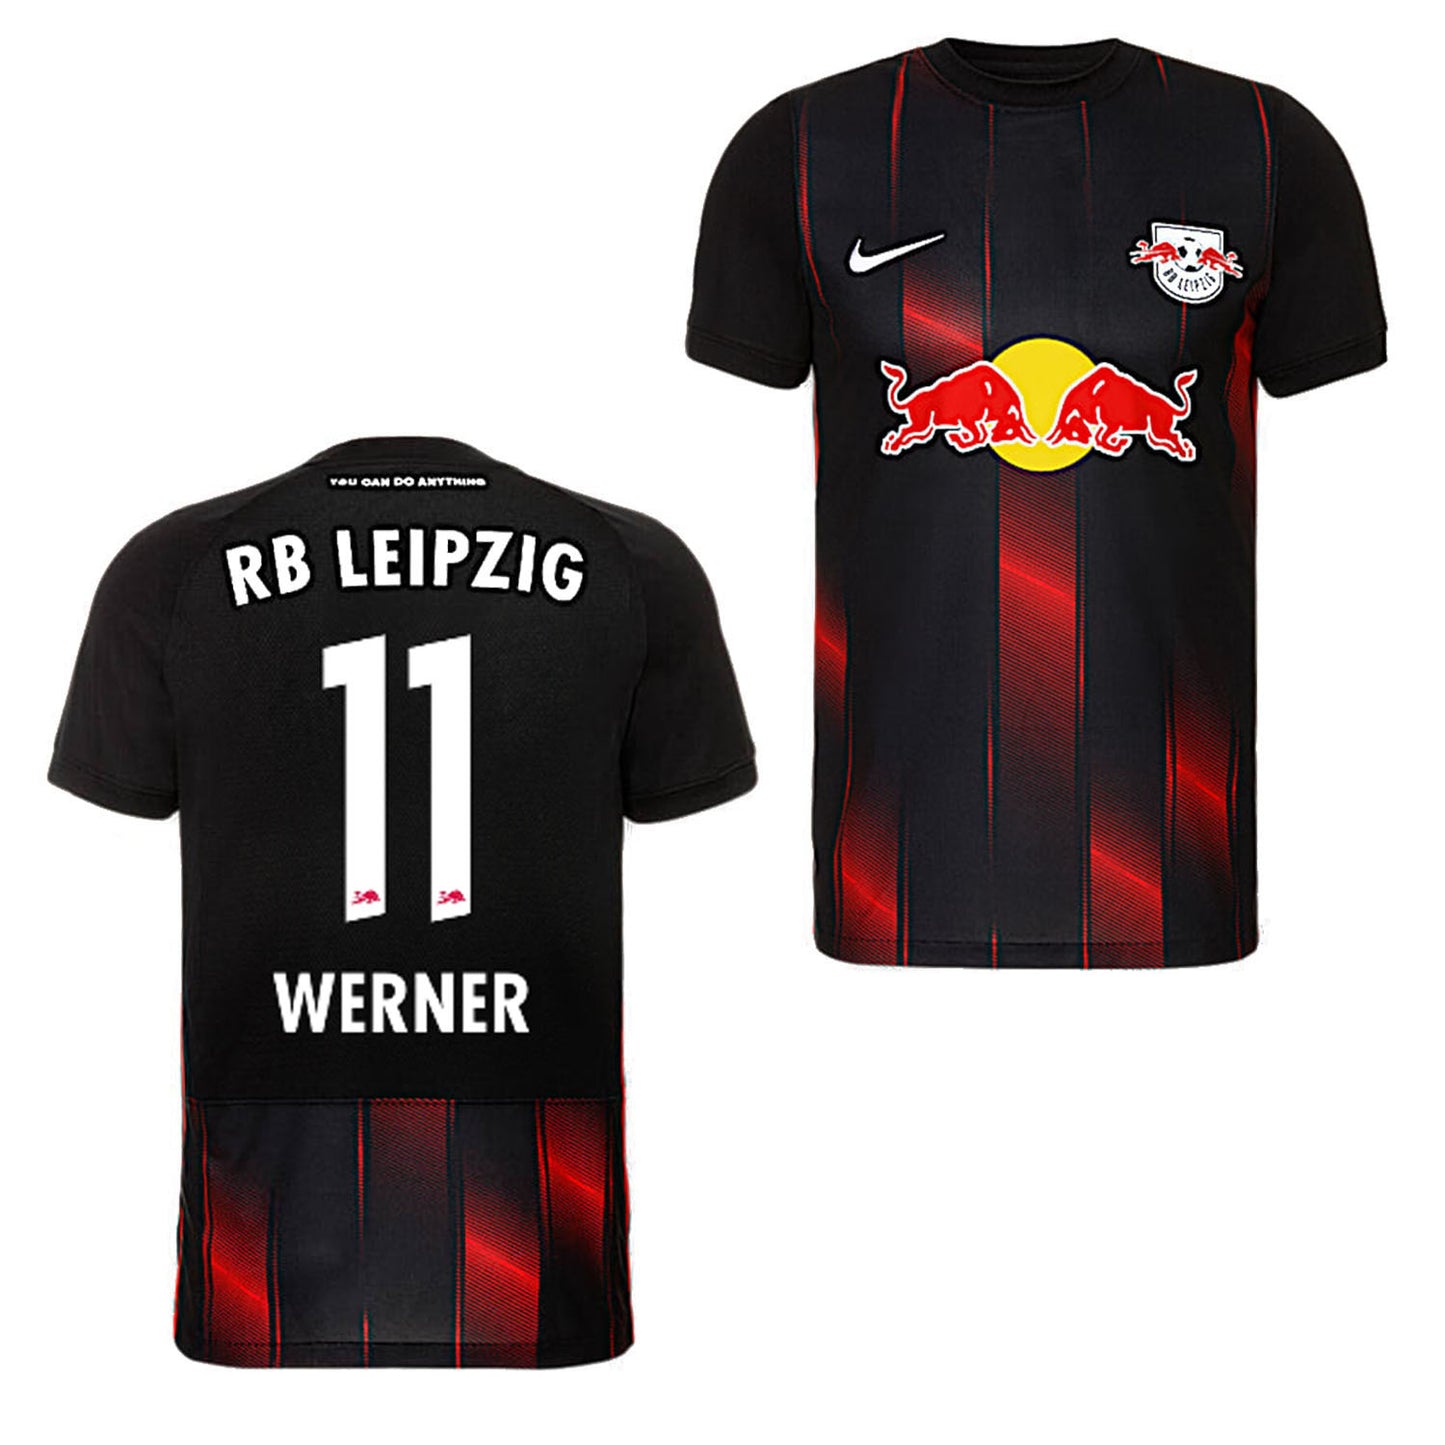 Timo Werner RB Leipzig 11 Jersey